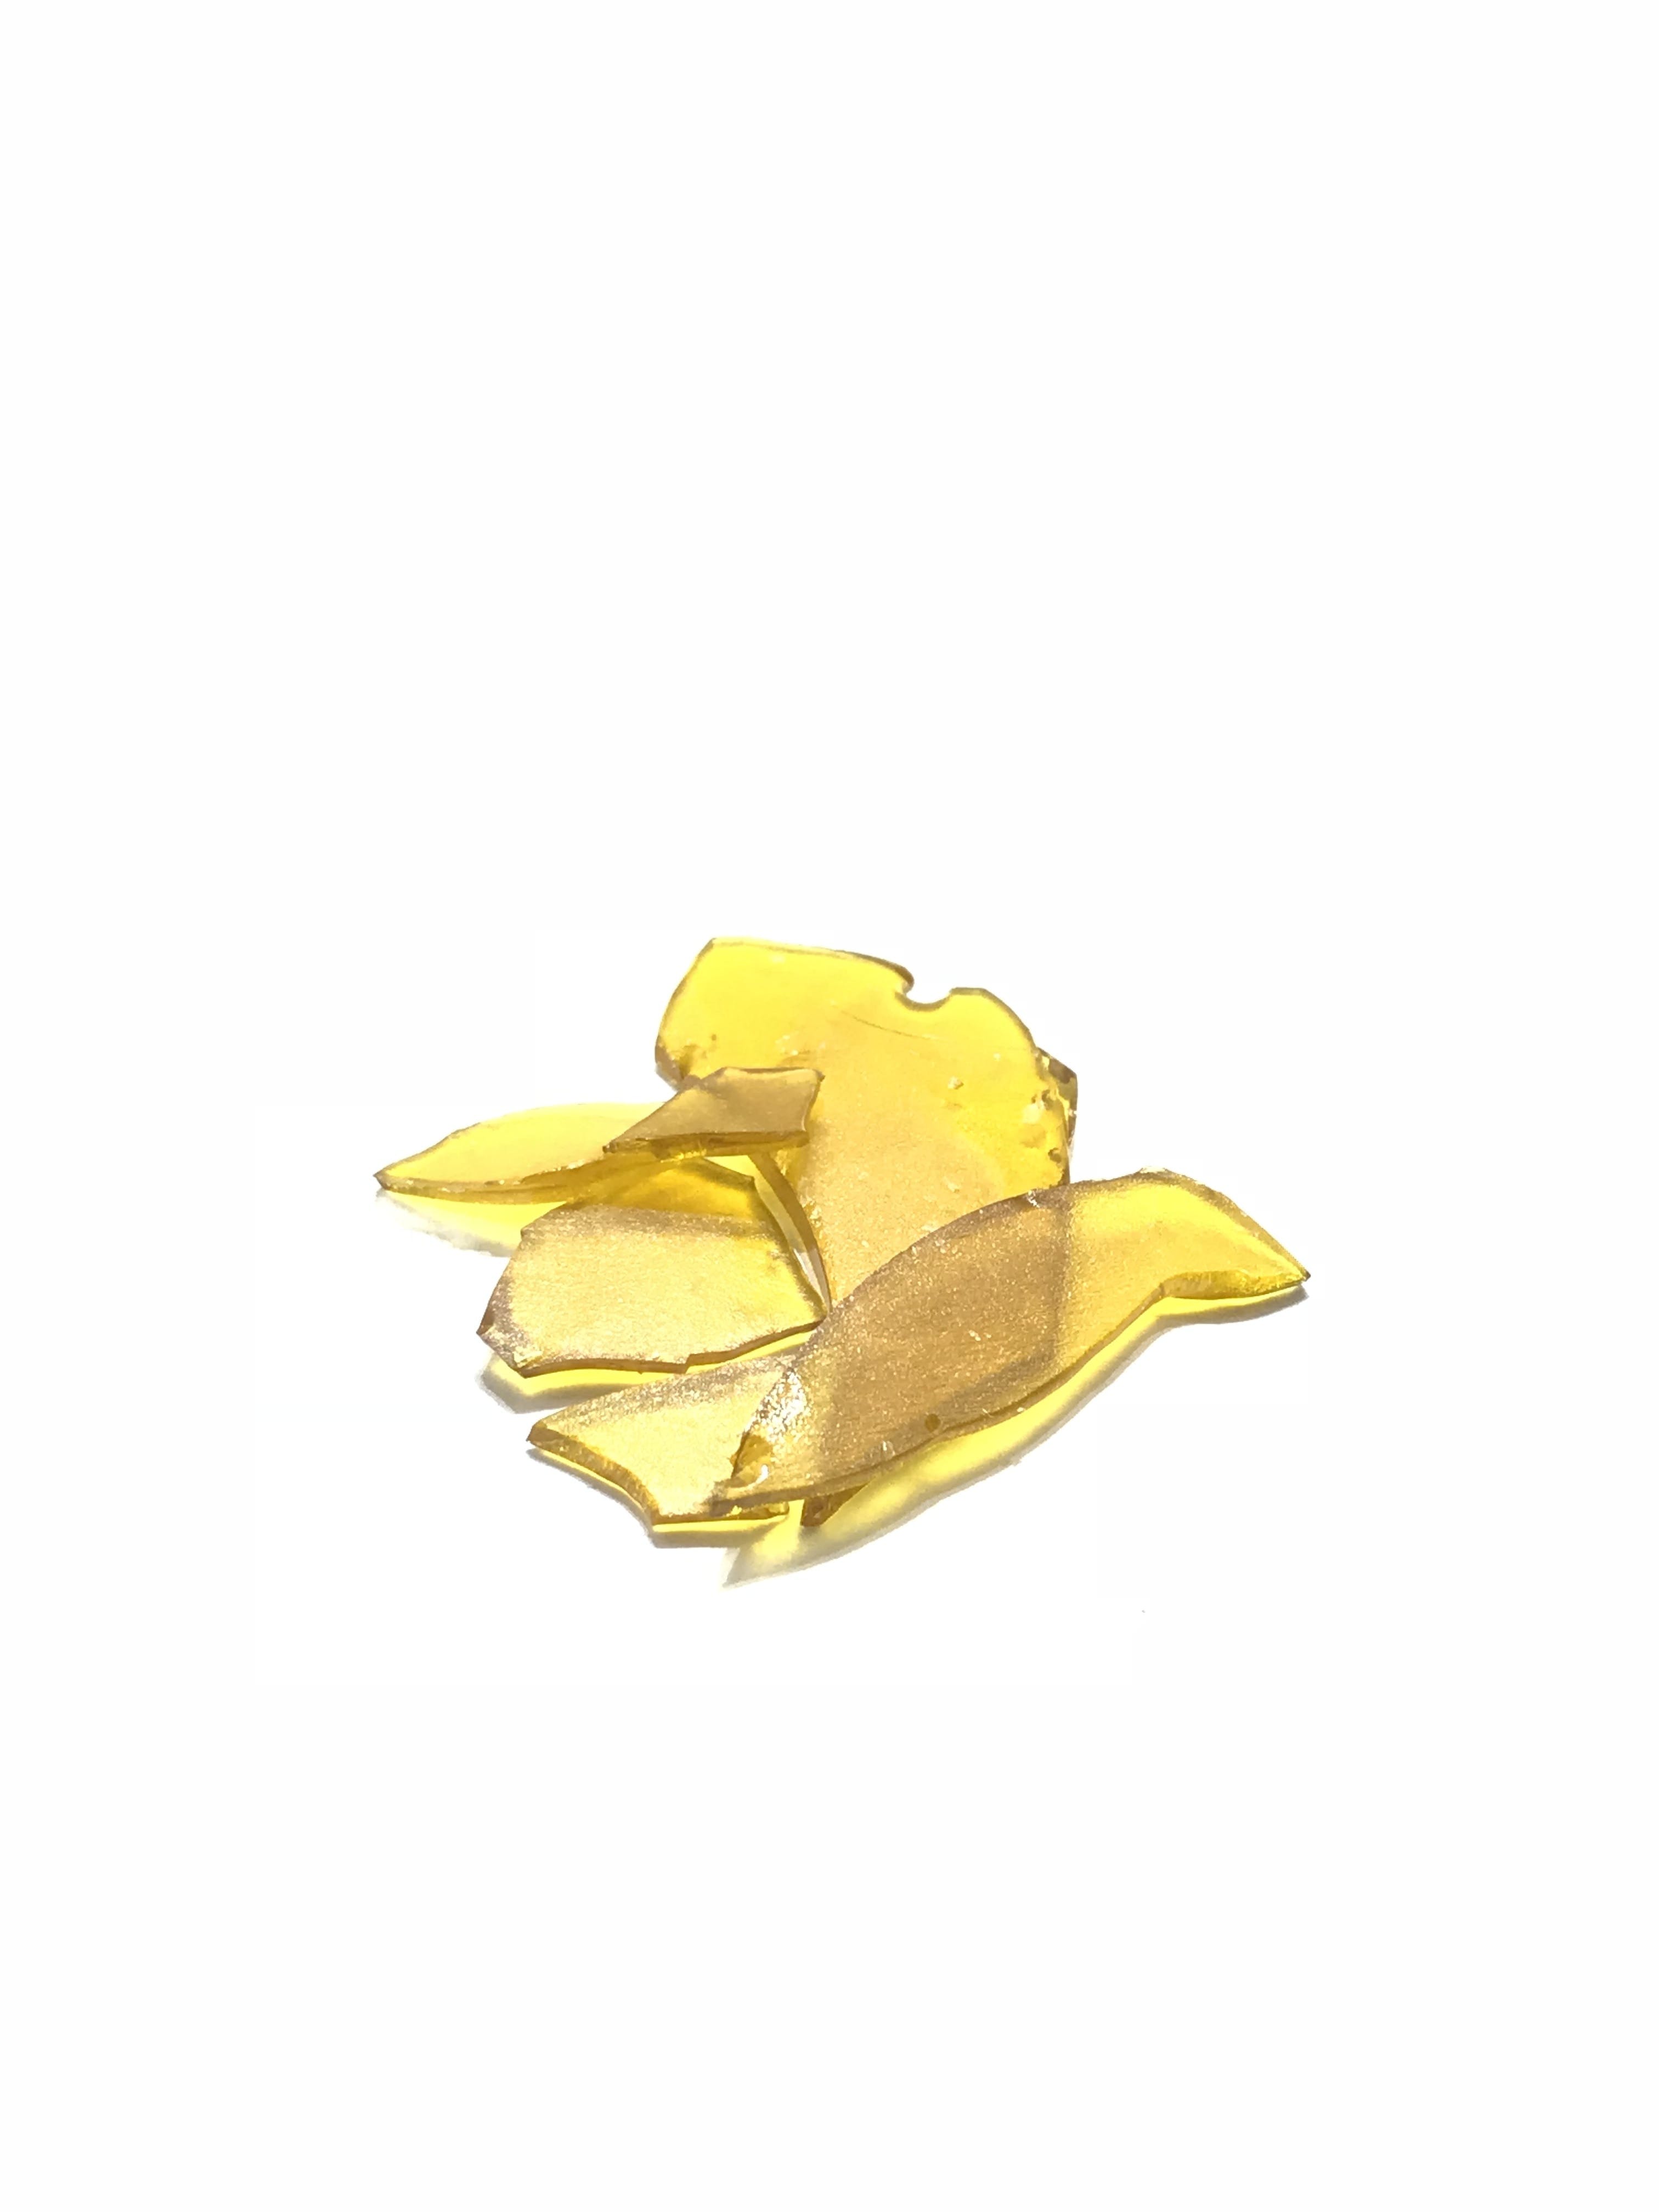 concentrate-concentrate-supply-co-cannatonic-shatter-members